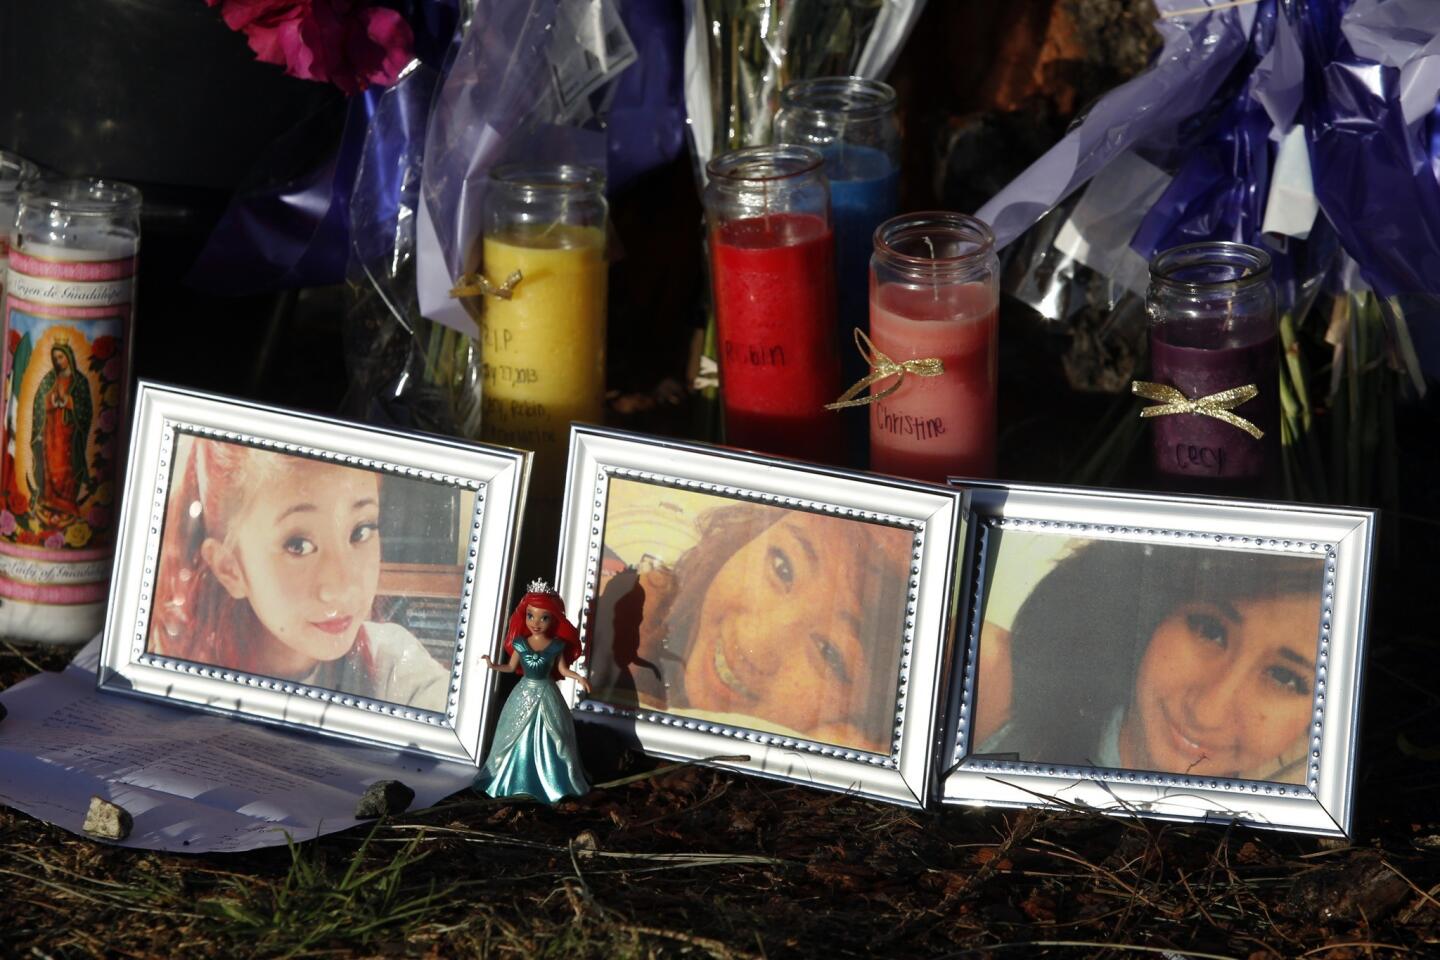 Flowers, candles, letters and photos are left at the crash site in Newport Beach. From left in the framed photographs are crash victims Robin Cabrera, Aurora "Christine" Cabrera and Cecilia D. Zamora. All three attended Irvine High School.